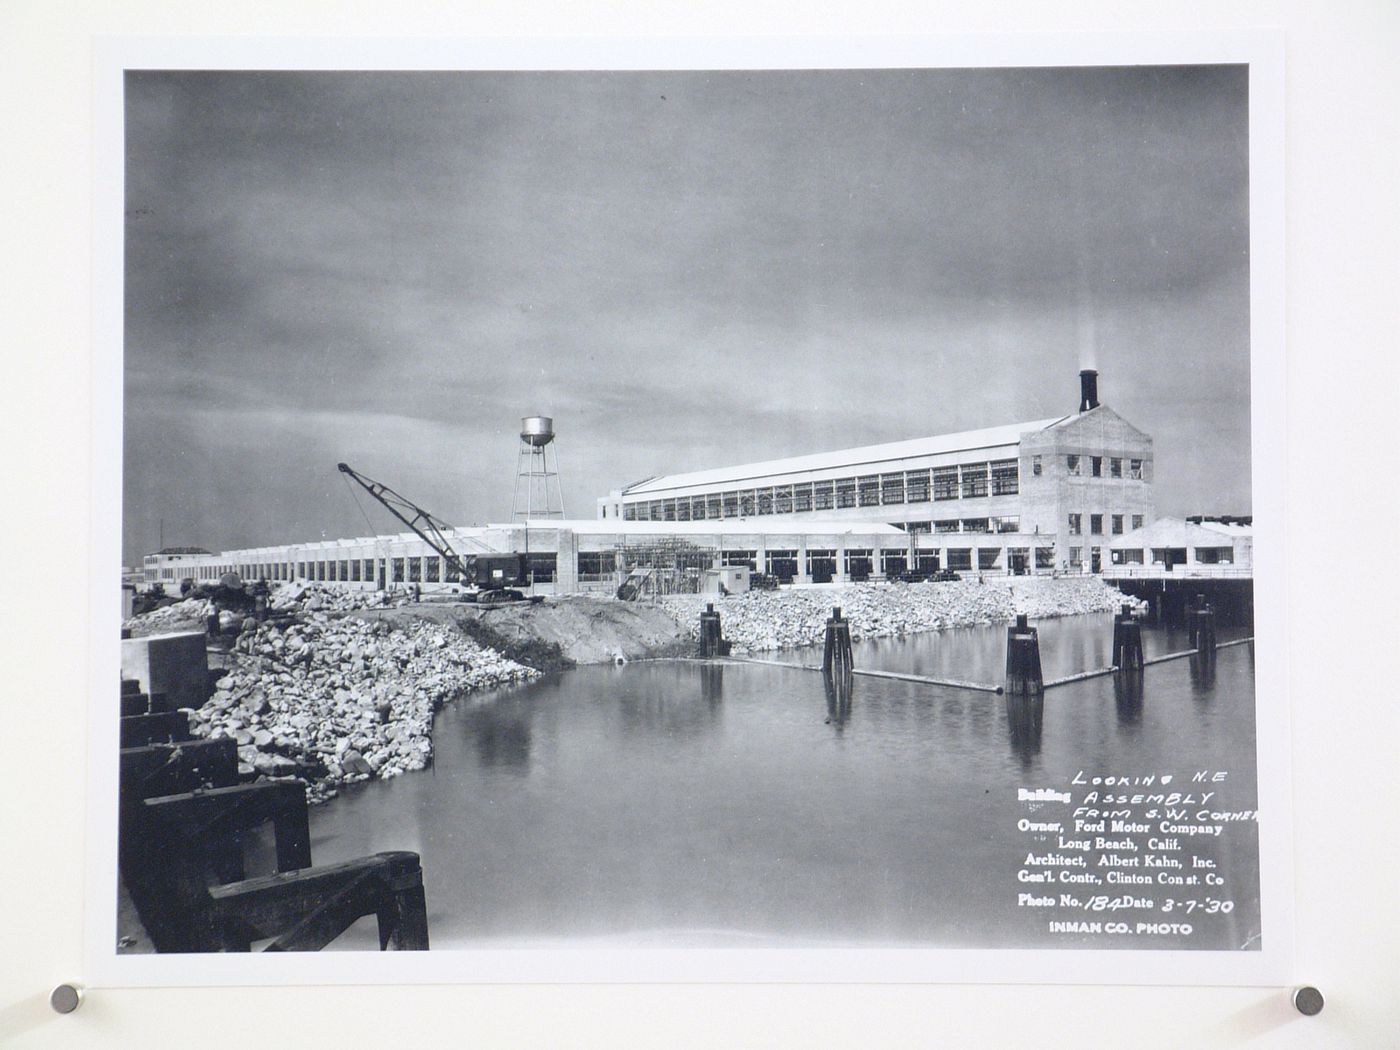 View of the south and east façades of the Assembly Building from the railroad bridge with a dock in the foreground under construction, Ford Motor Company Automobile Assembly Plant, Long Beach, California